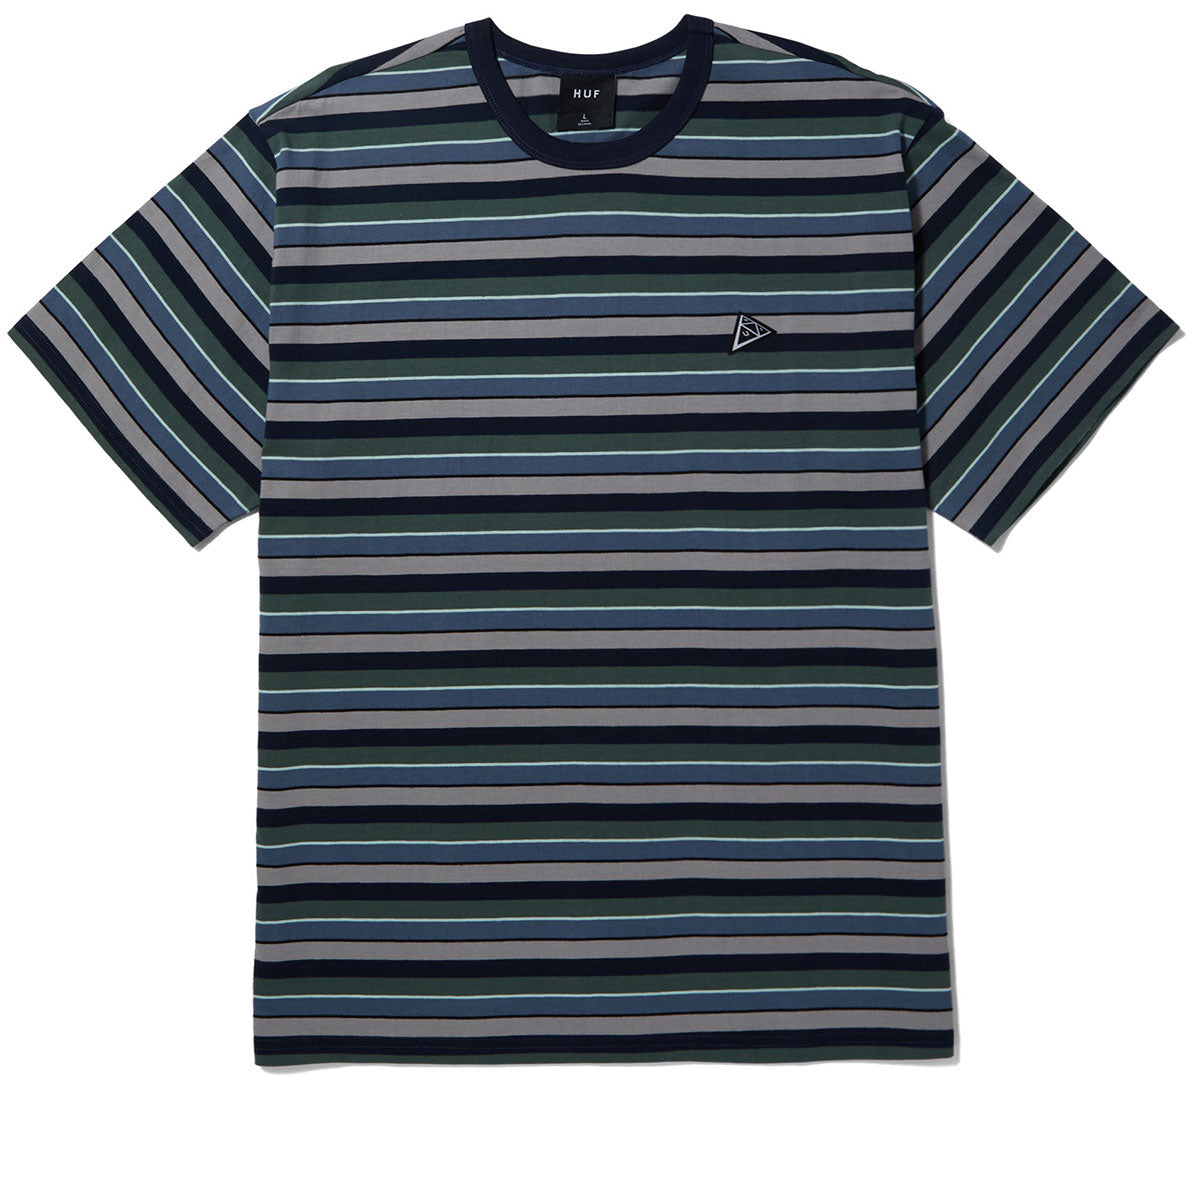 HUF Triple Triangle Relaxed Knit Shirt - Oil Blue image 1